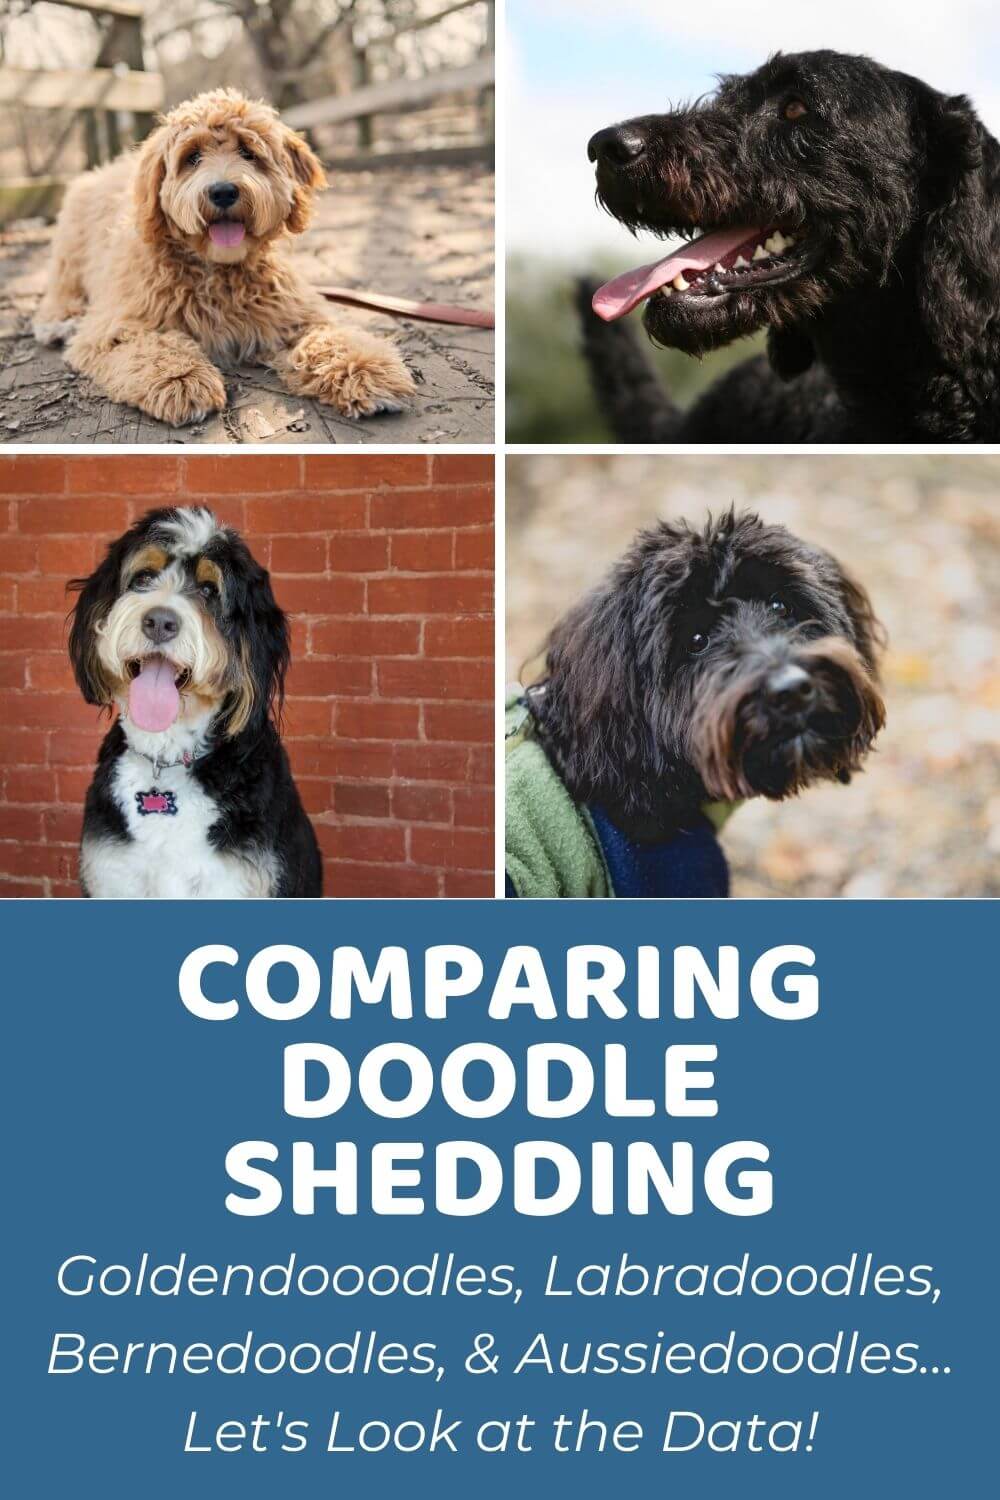 Top Hypoallergenic Dogs - Let's Compare Doodles (With Data)!